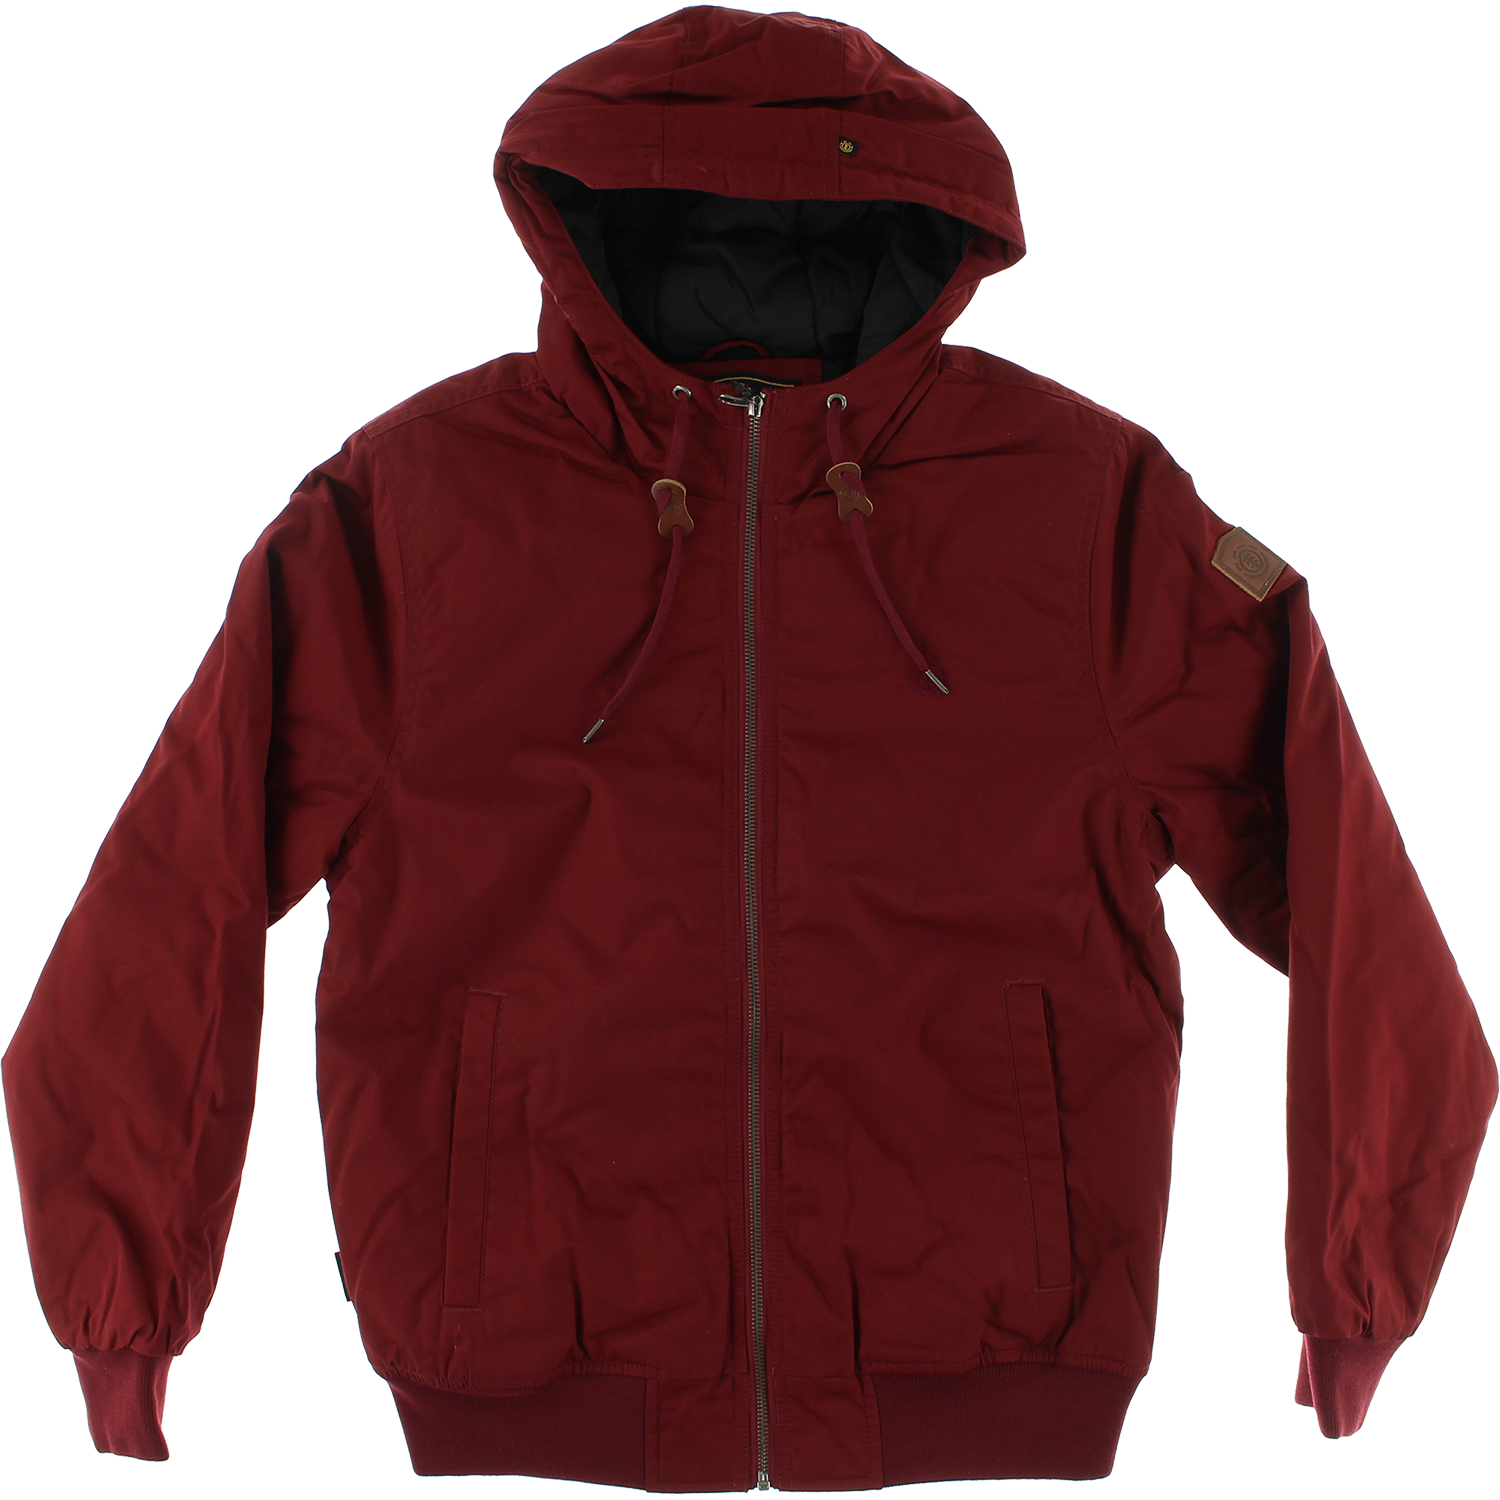 Element Dulcey Jacket Port Red